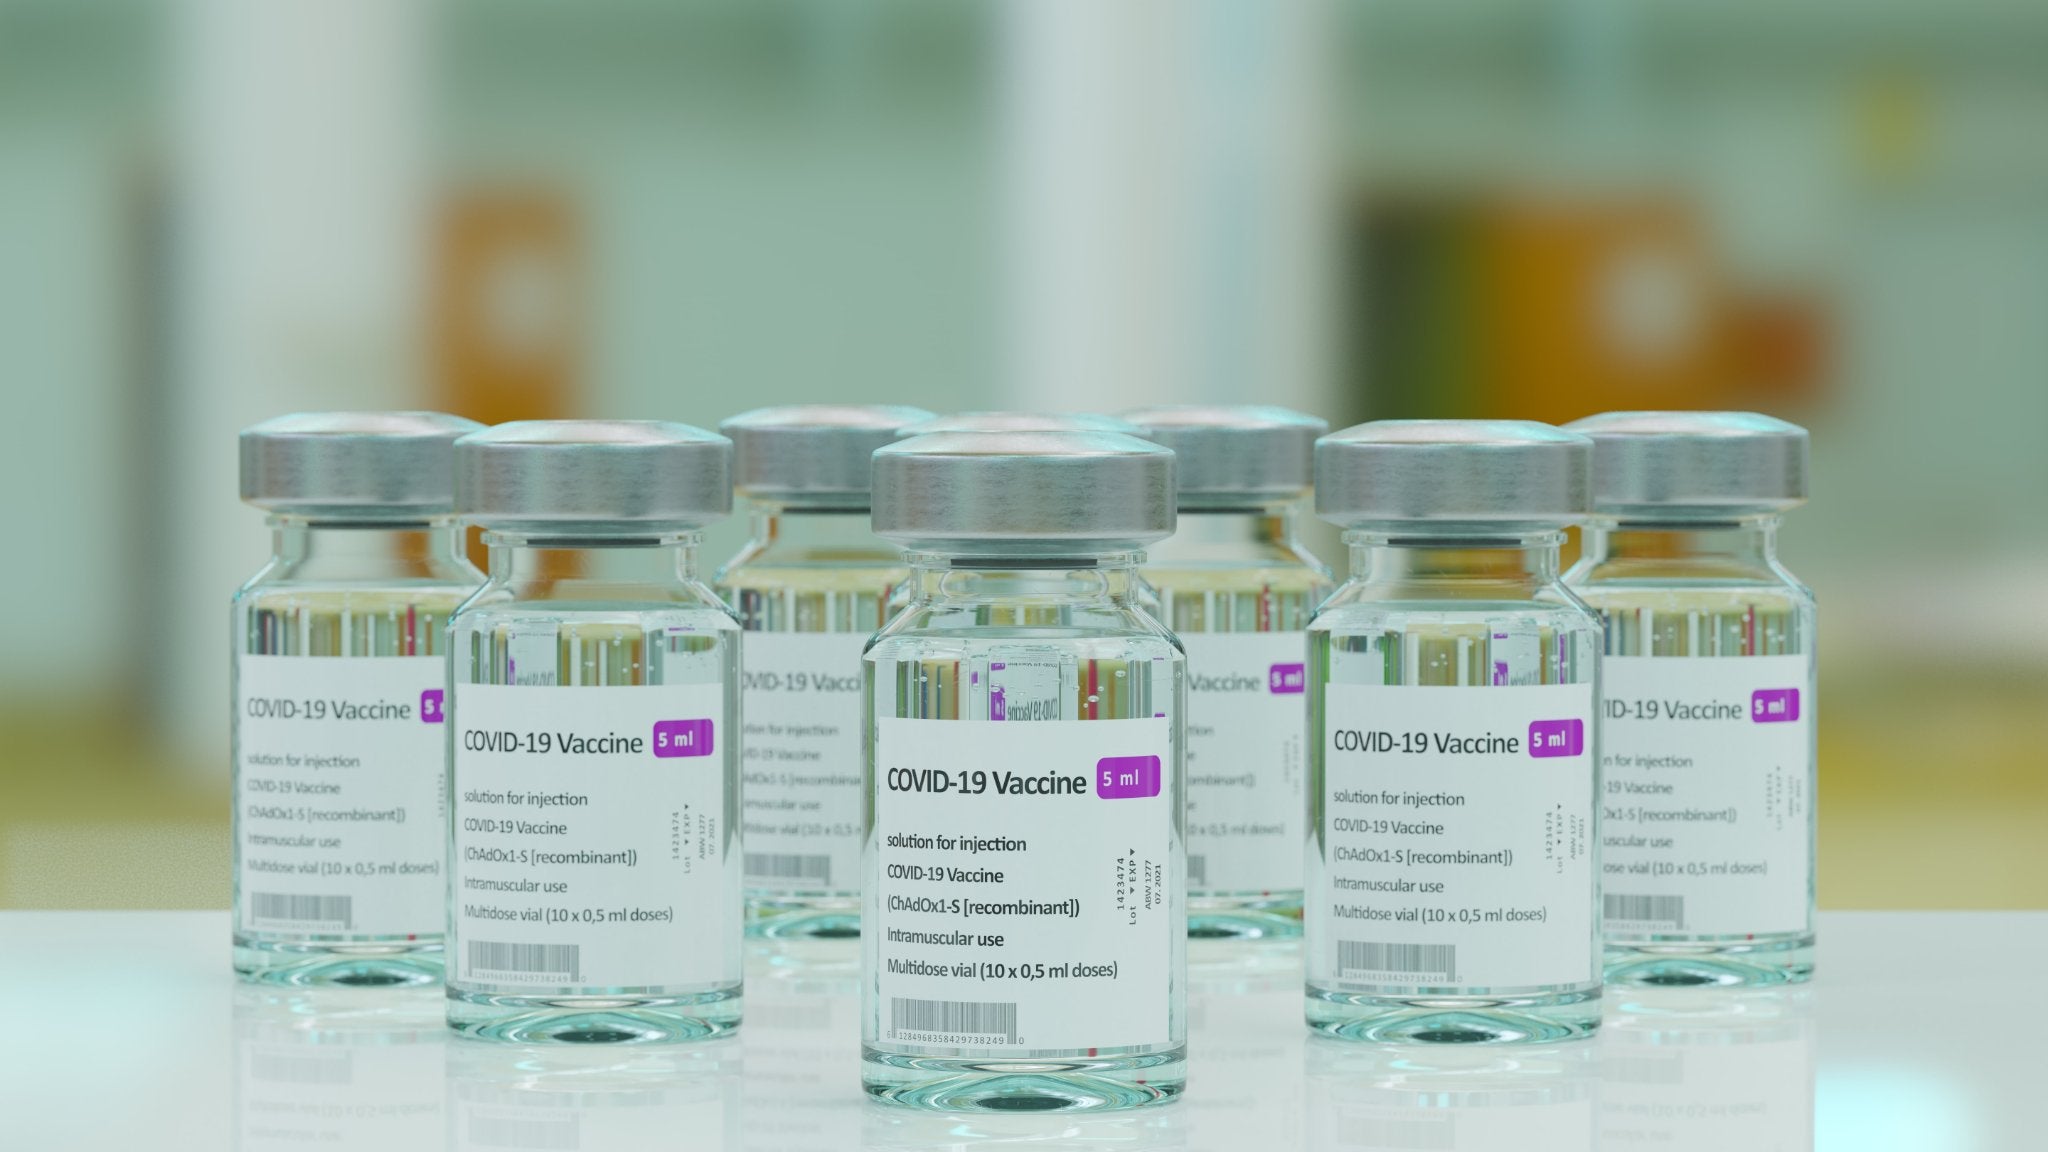 SK bioscience-GSK Covid-19 vaccine candidate enters Phase III trial